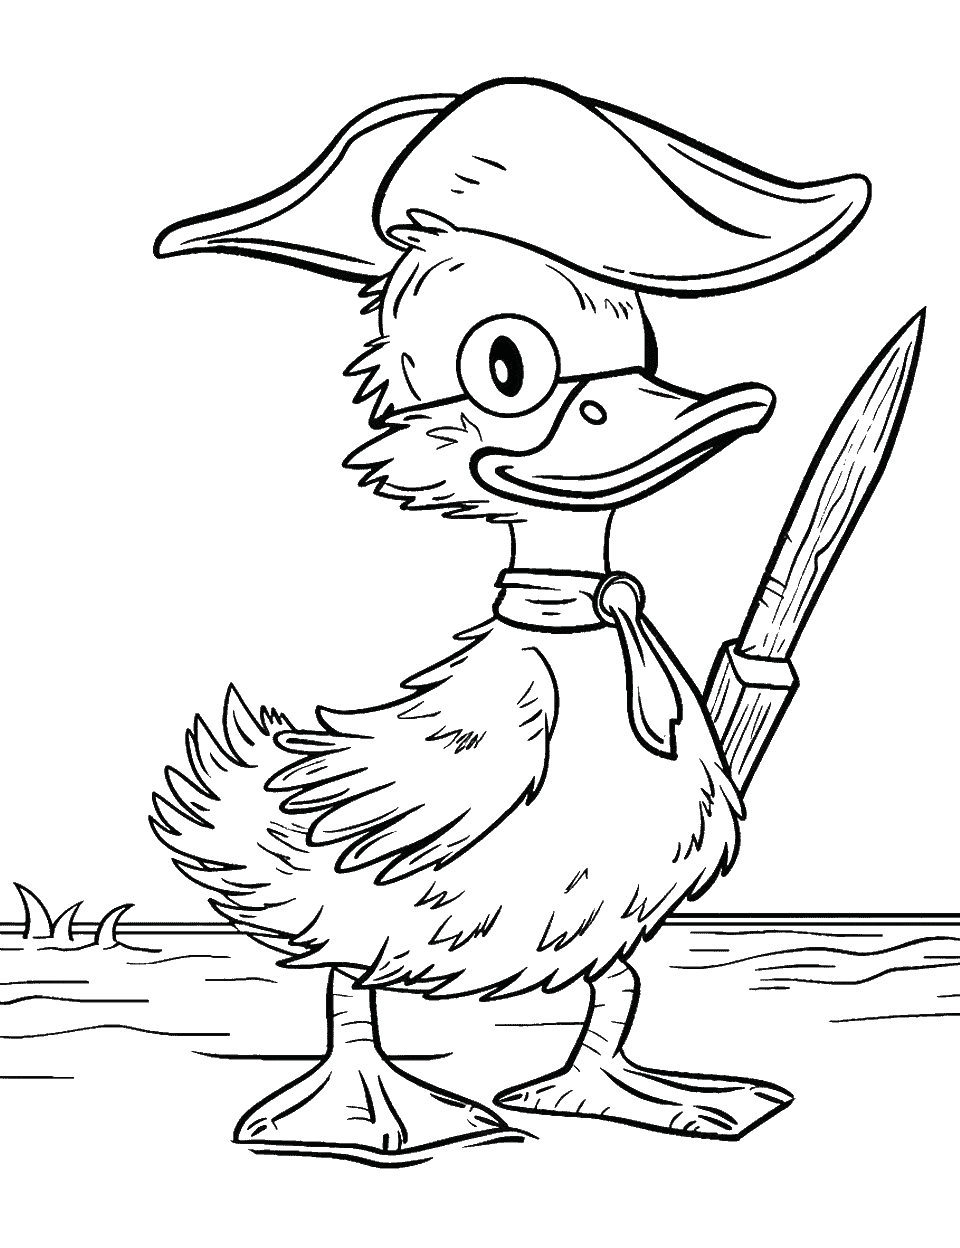 Pirate Duck Coloring Page - A pirate duck, complete with a hat and a wooden sword.